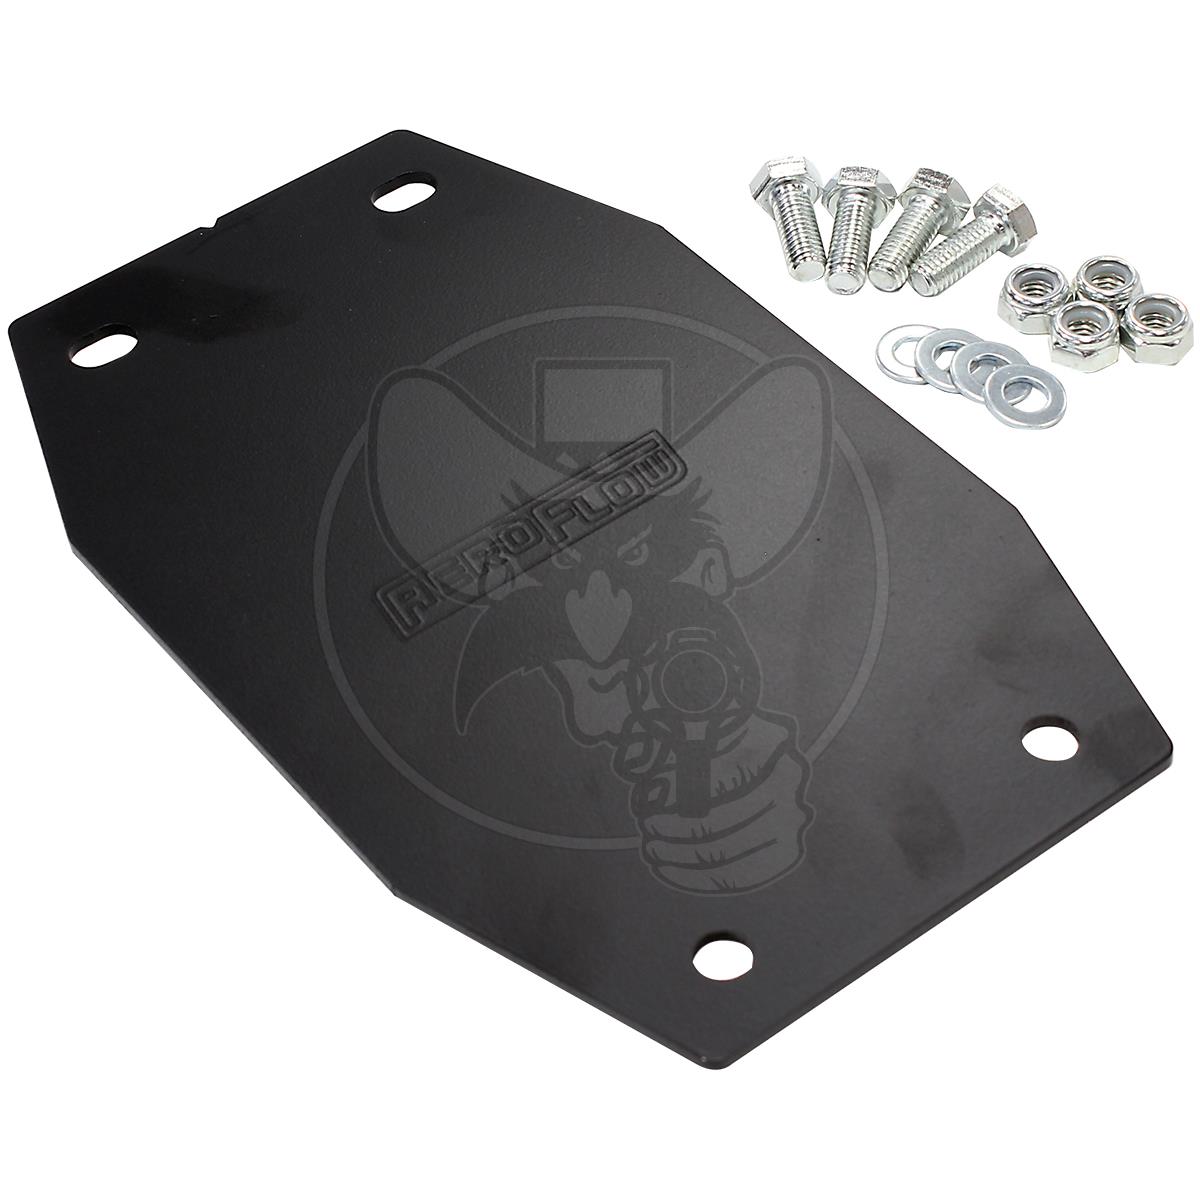 AEROFLOW BANG SHIFT SHIFTER MOUNTING PLATE FITS VE-VF COMMODORE